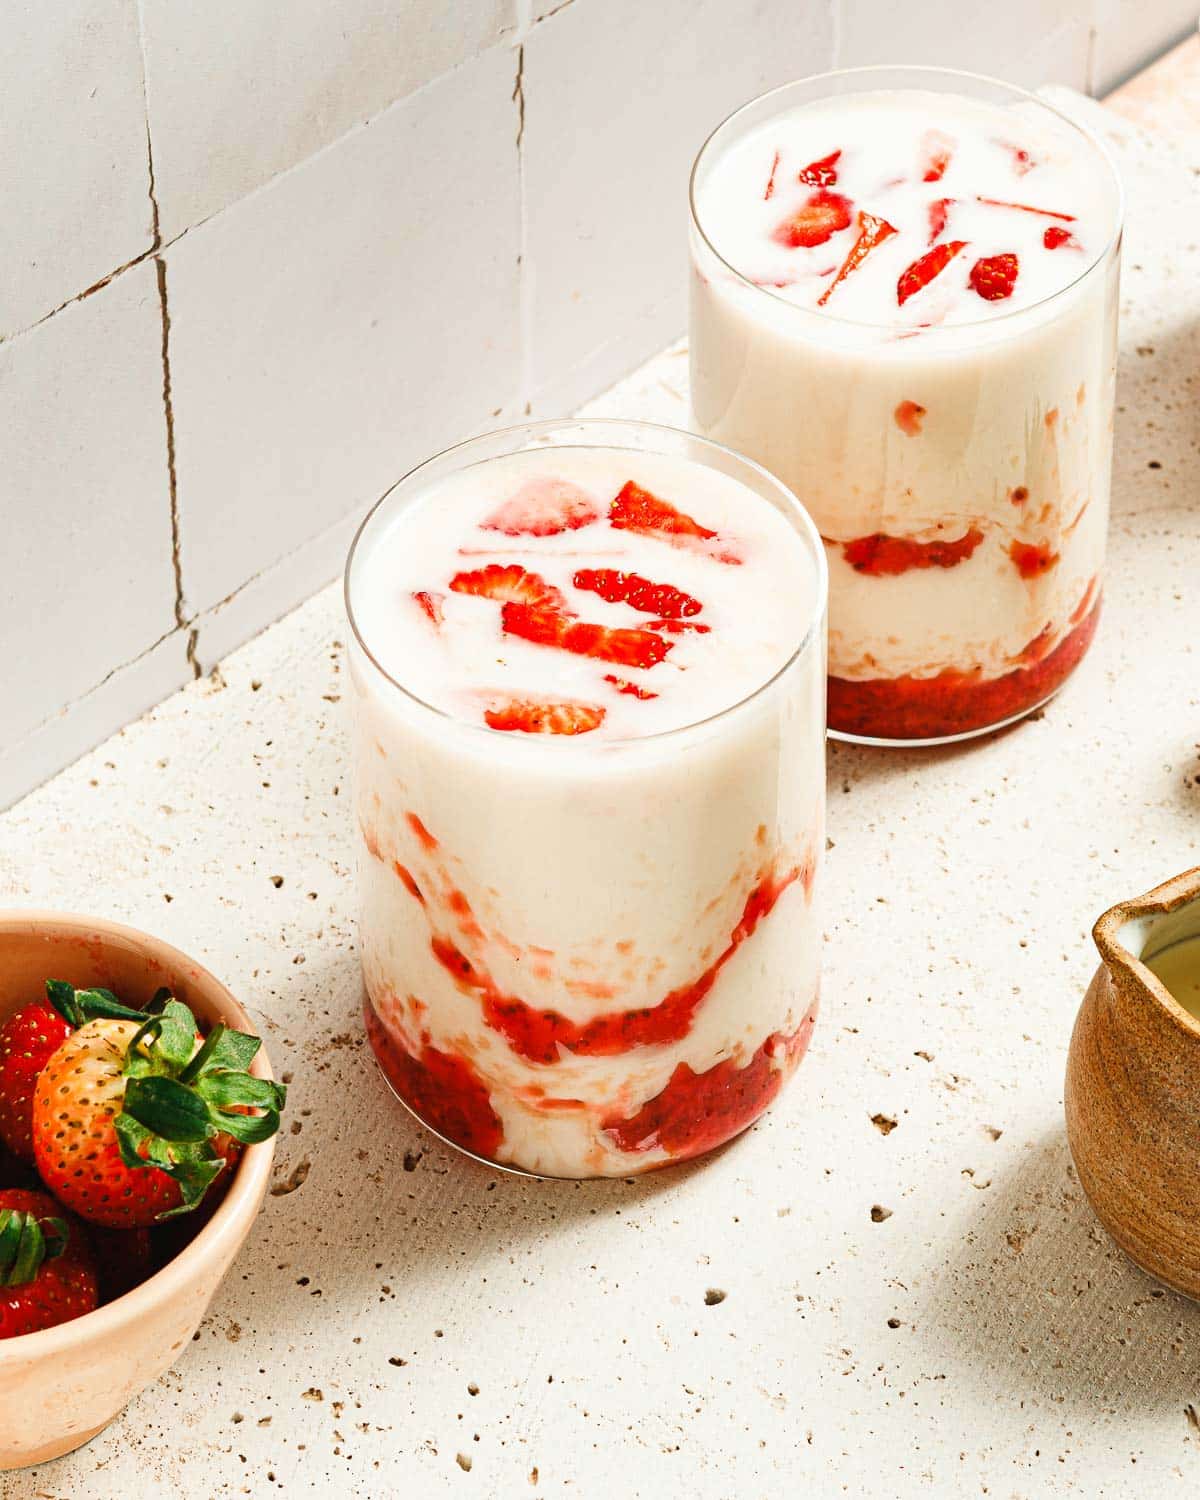 A side close shot image shows 2 glasses of refreshing Korean strawberrymilk ready to serve.